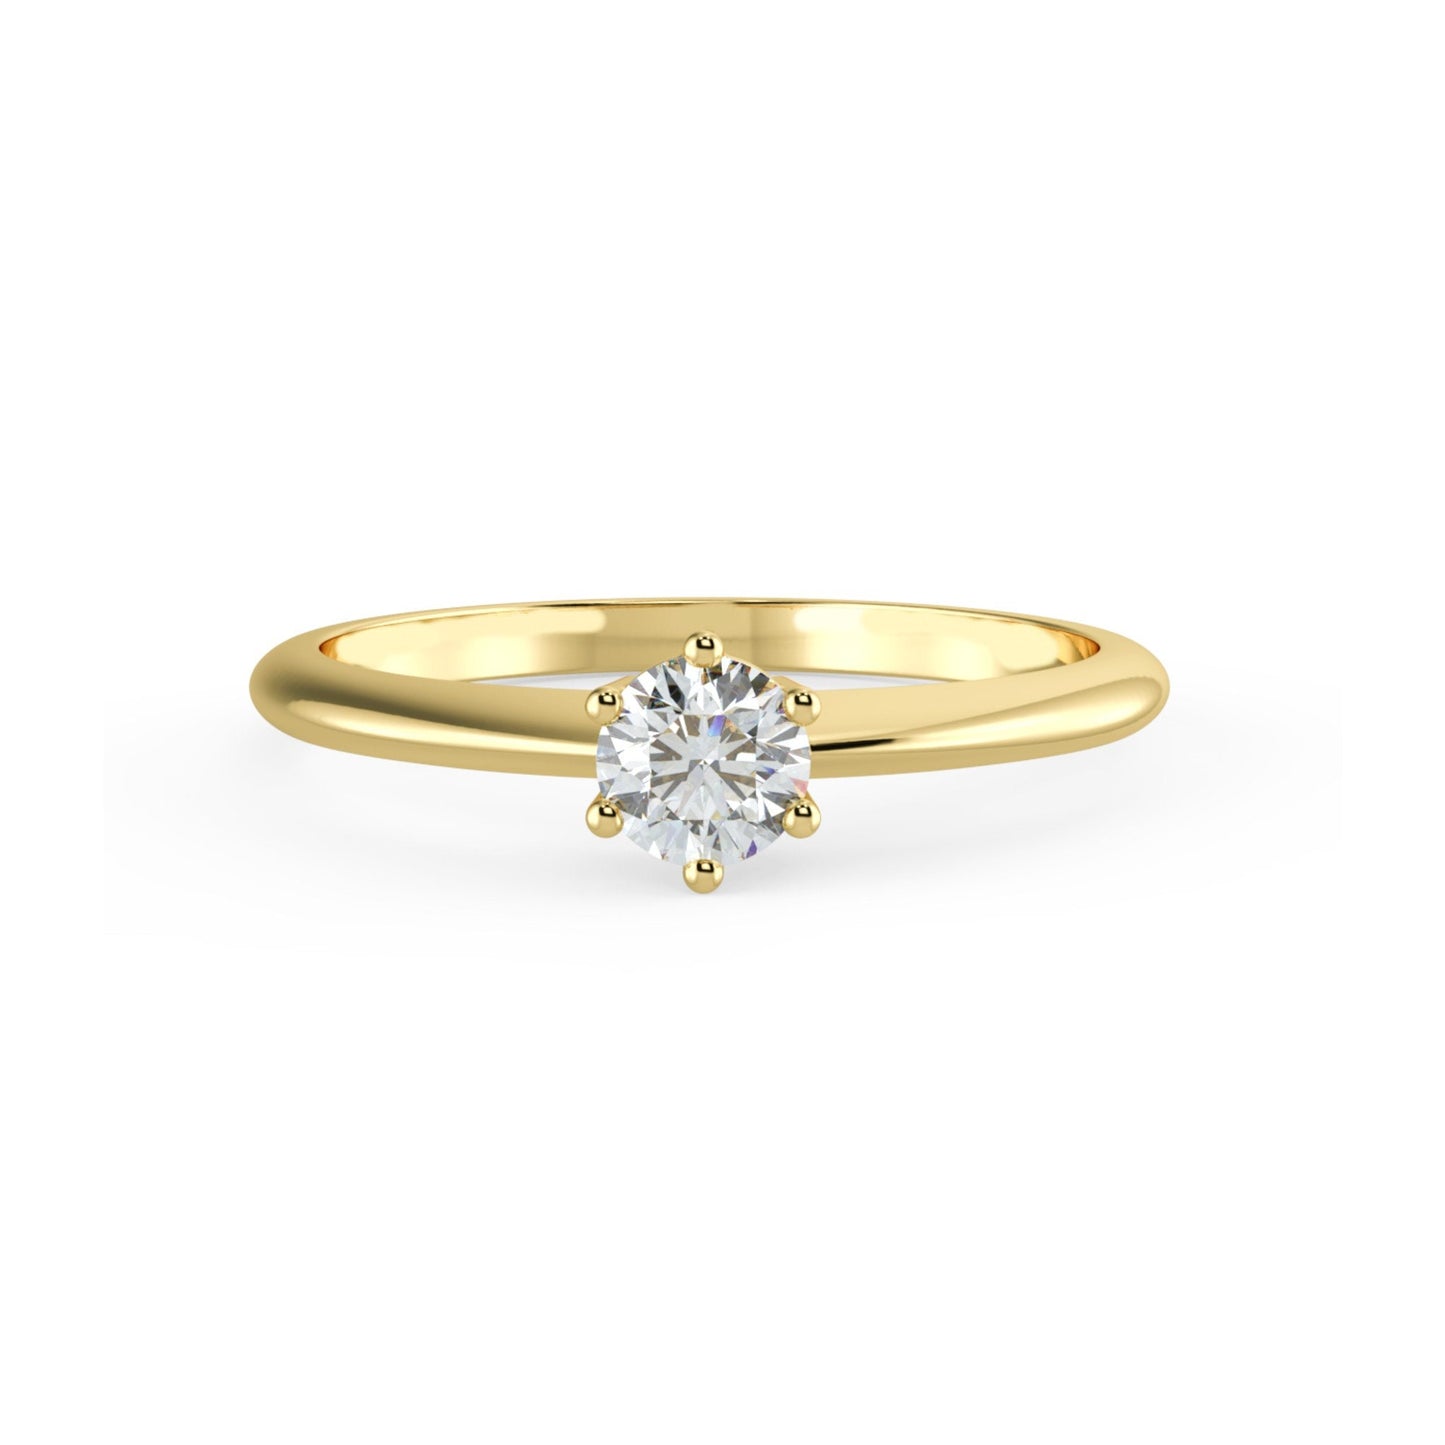 Dainty Diamond Engagement Ring in 14k Solid Gold, , Solitaire Ring, Diamond Wedding Ring, Minimalist Engagement Ring